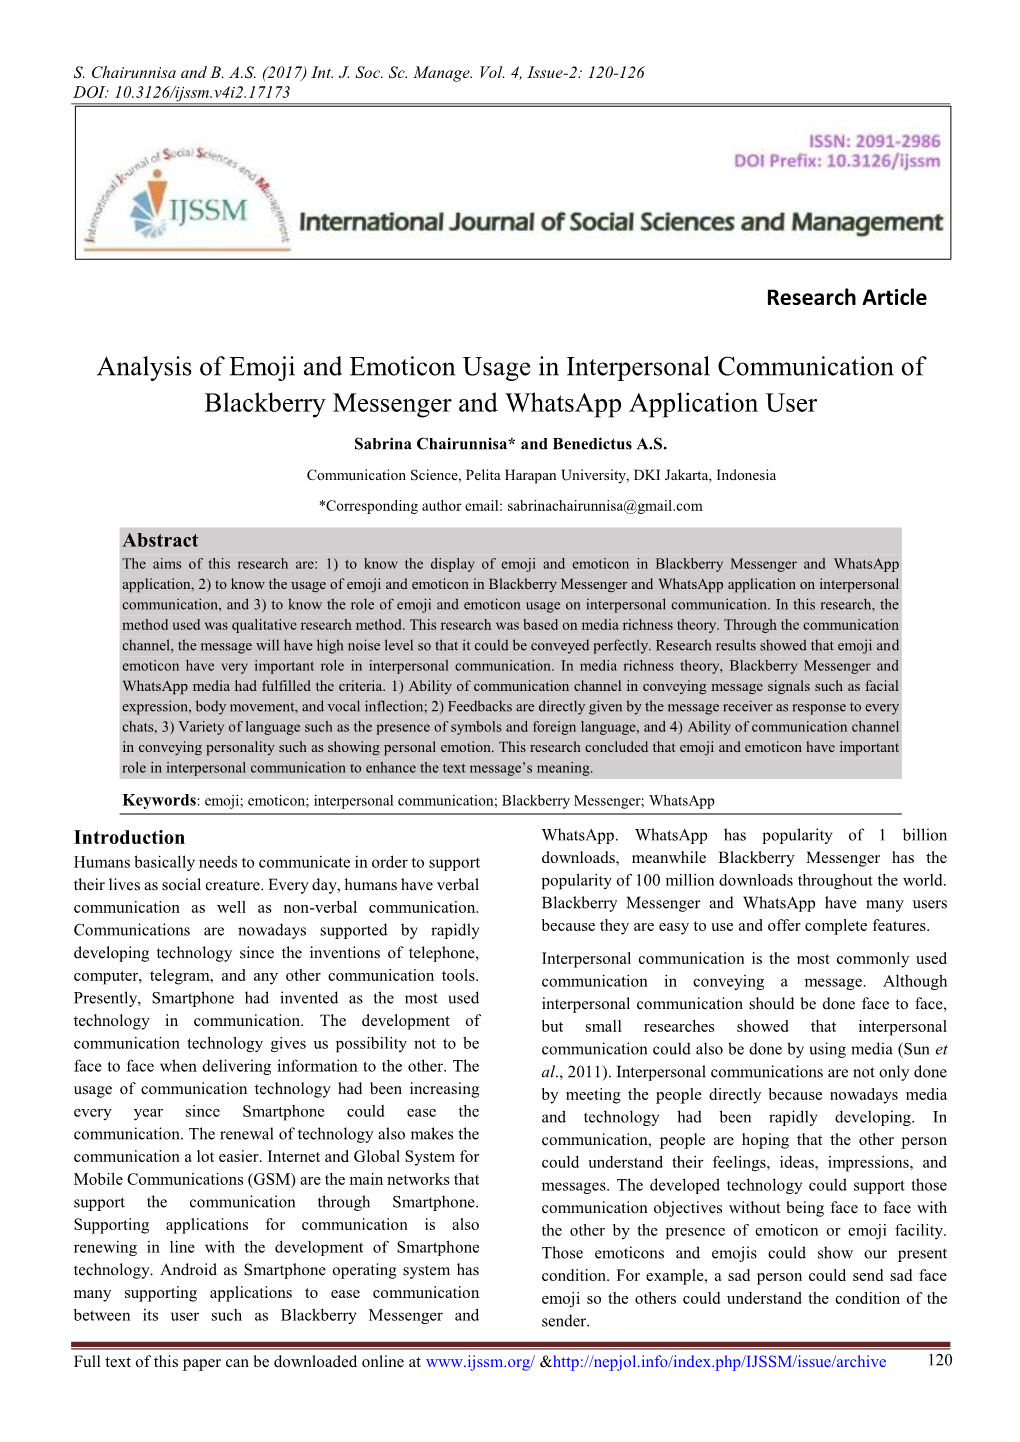 Analysis of Emoji and Emoticon Usage in Interpersonal Communication of Blackberry Messenger and Whatsapp Application User